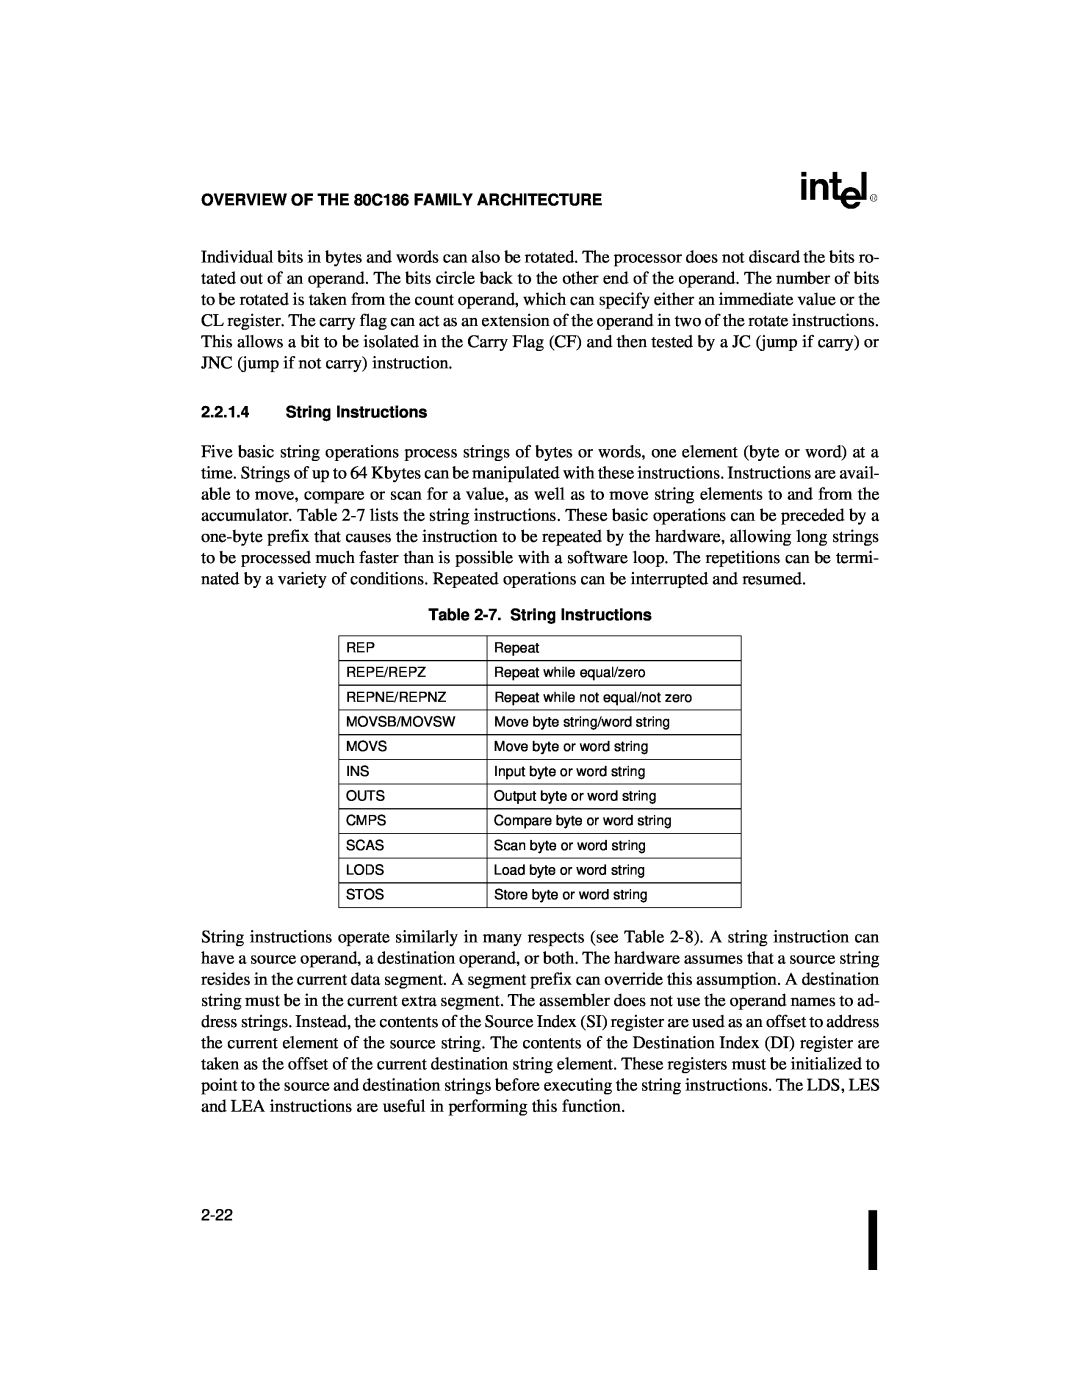 Intel 80C186XL, 80C188XL OVERVIEW OF THE 80C186 FAMILY ARCHITECTURE, 2.2.1.4String Instructions, 7.String Instructions 